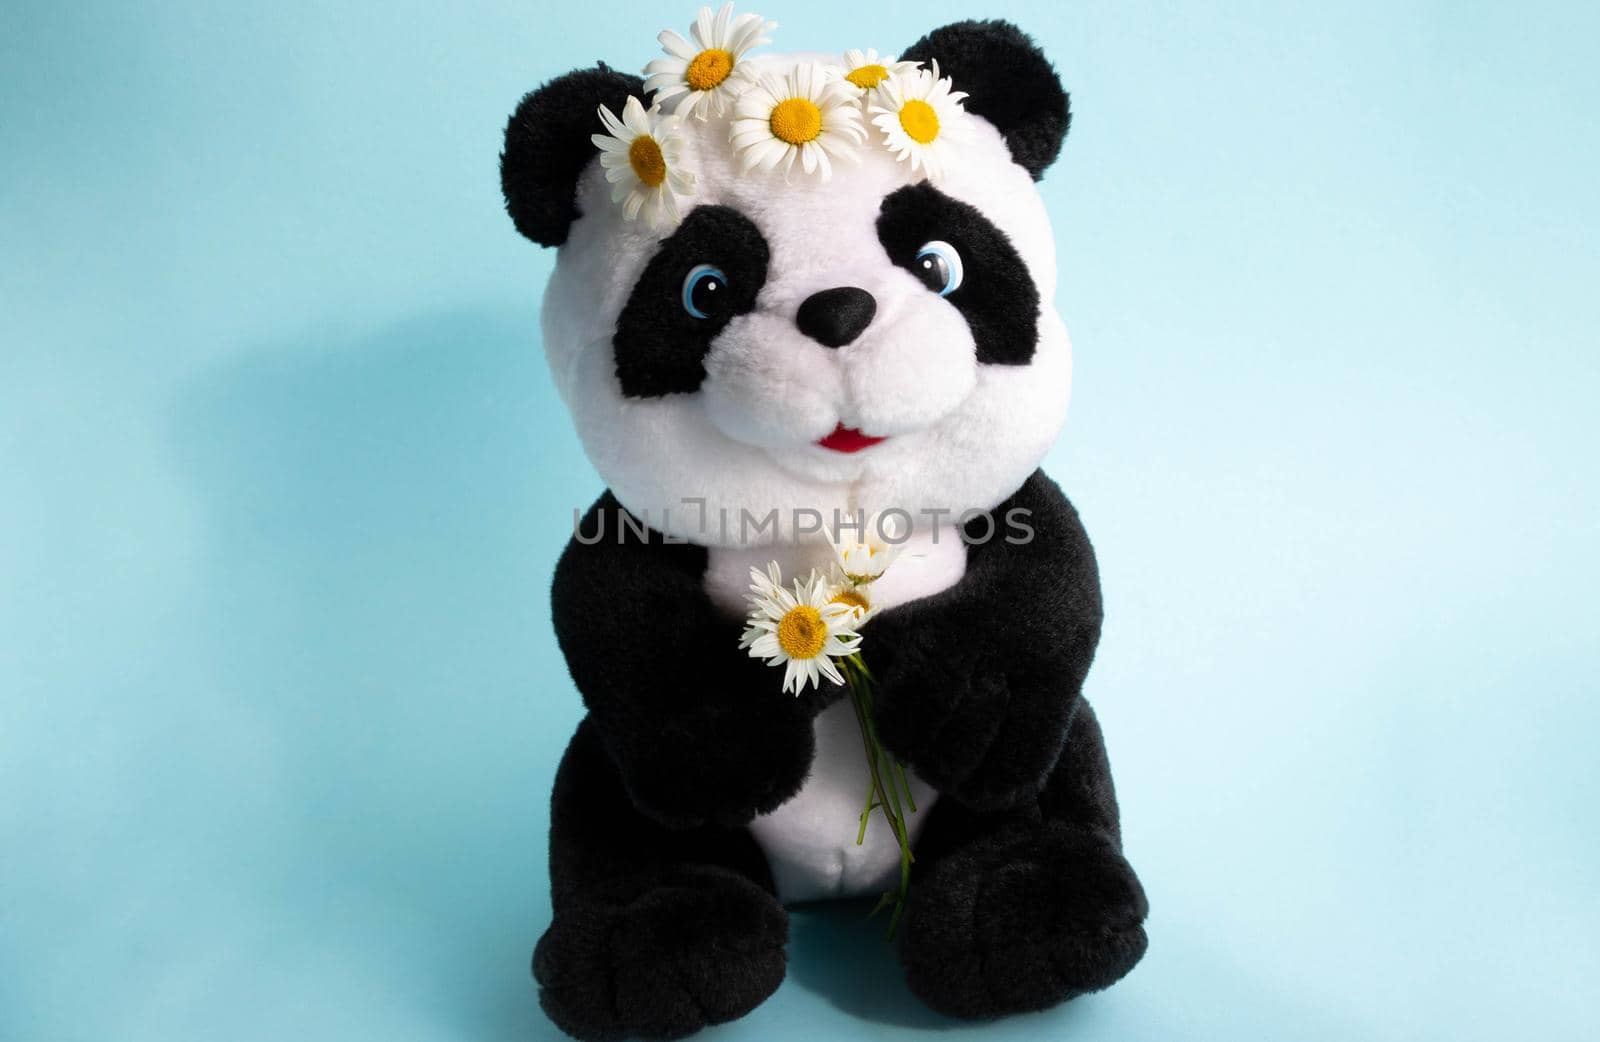 Soft toy Panda on a blue background with daisies on his head.Concept of the environment.